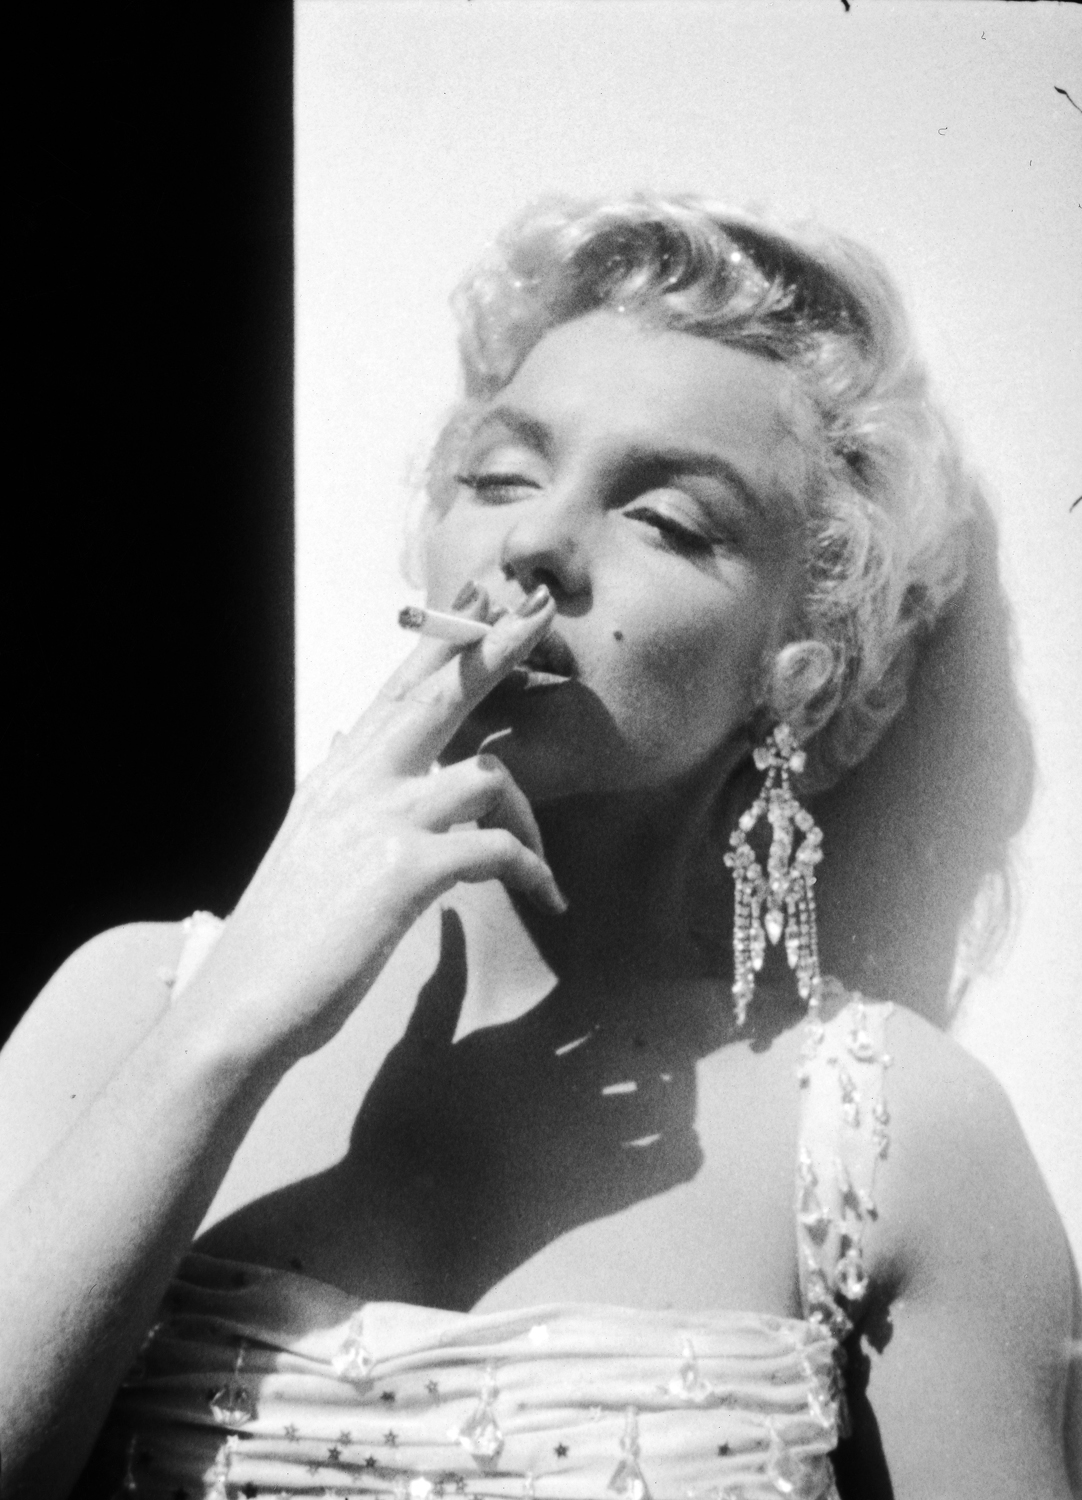 Monroe smokes on the set at the 20th Century Fox studios in 1954.